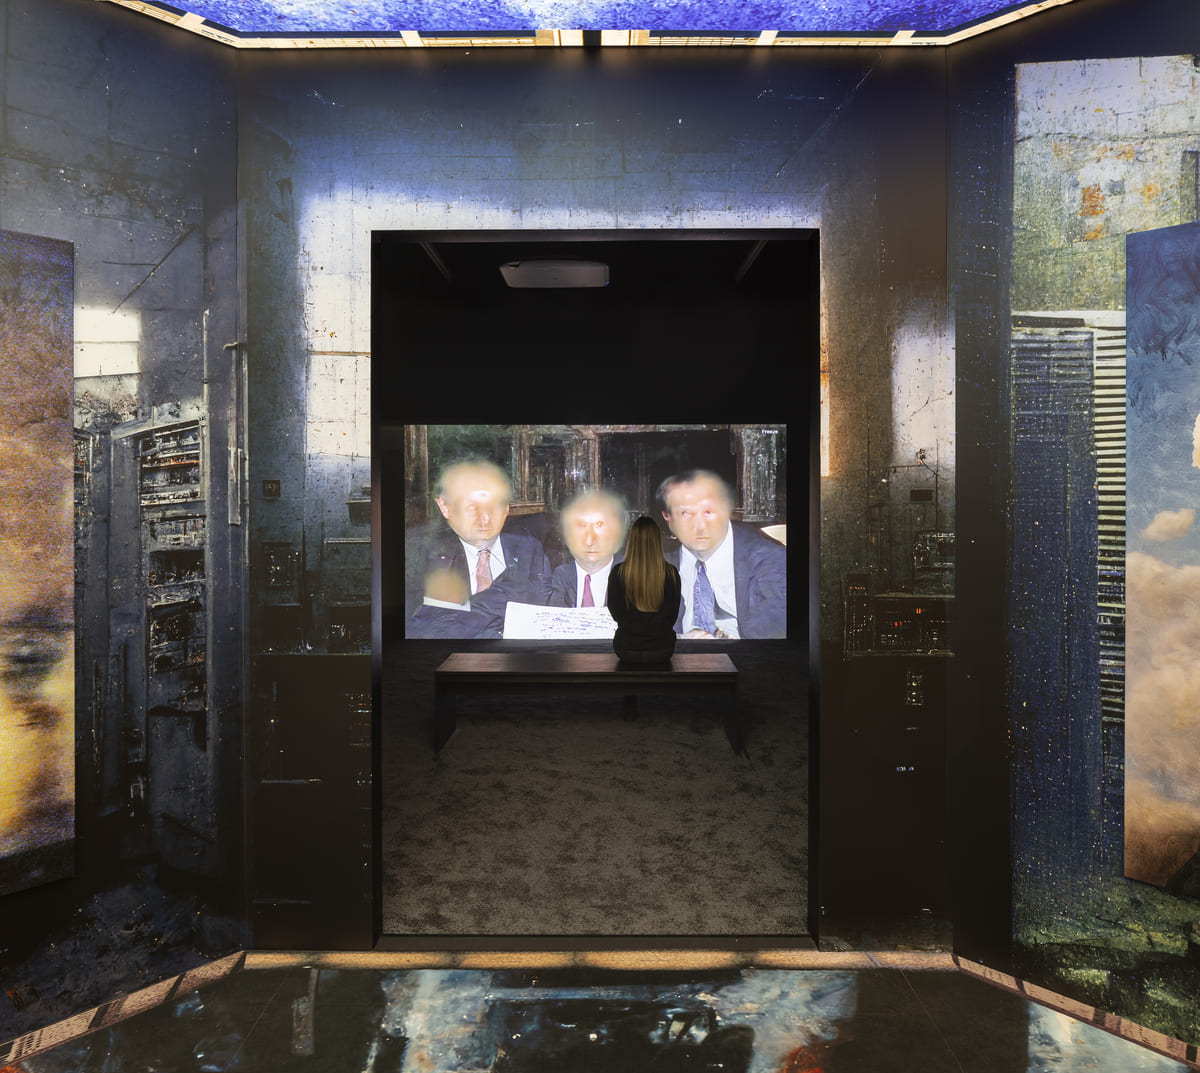 A photo of a gallery space in which a woman sits on a bench in front of a screen with a strange image of three blurry white men; she is viewed through a doorway wallpapered with an image of a dark cityscape